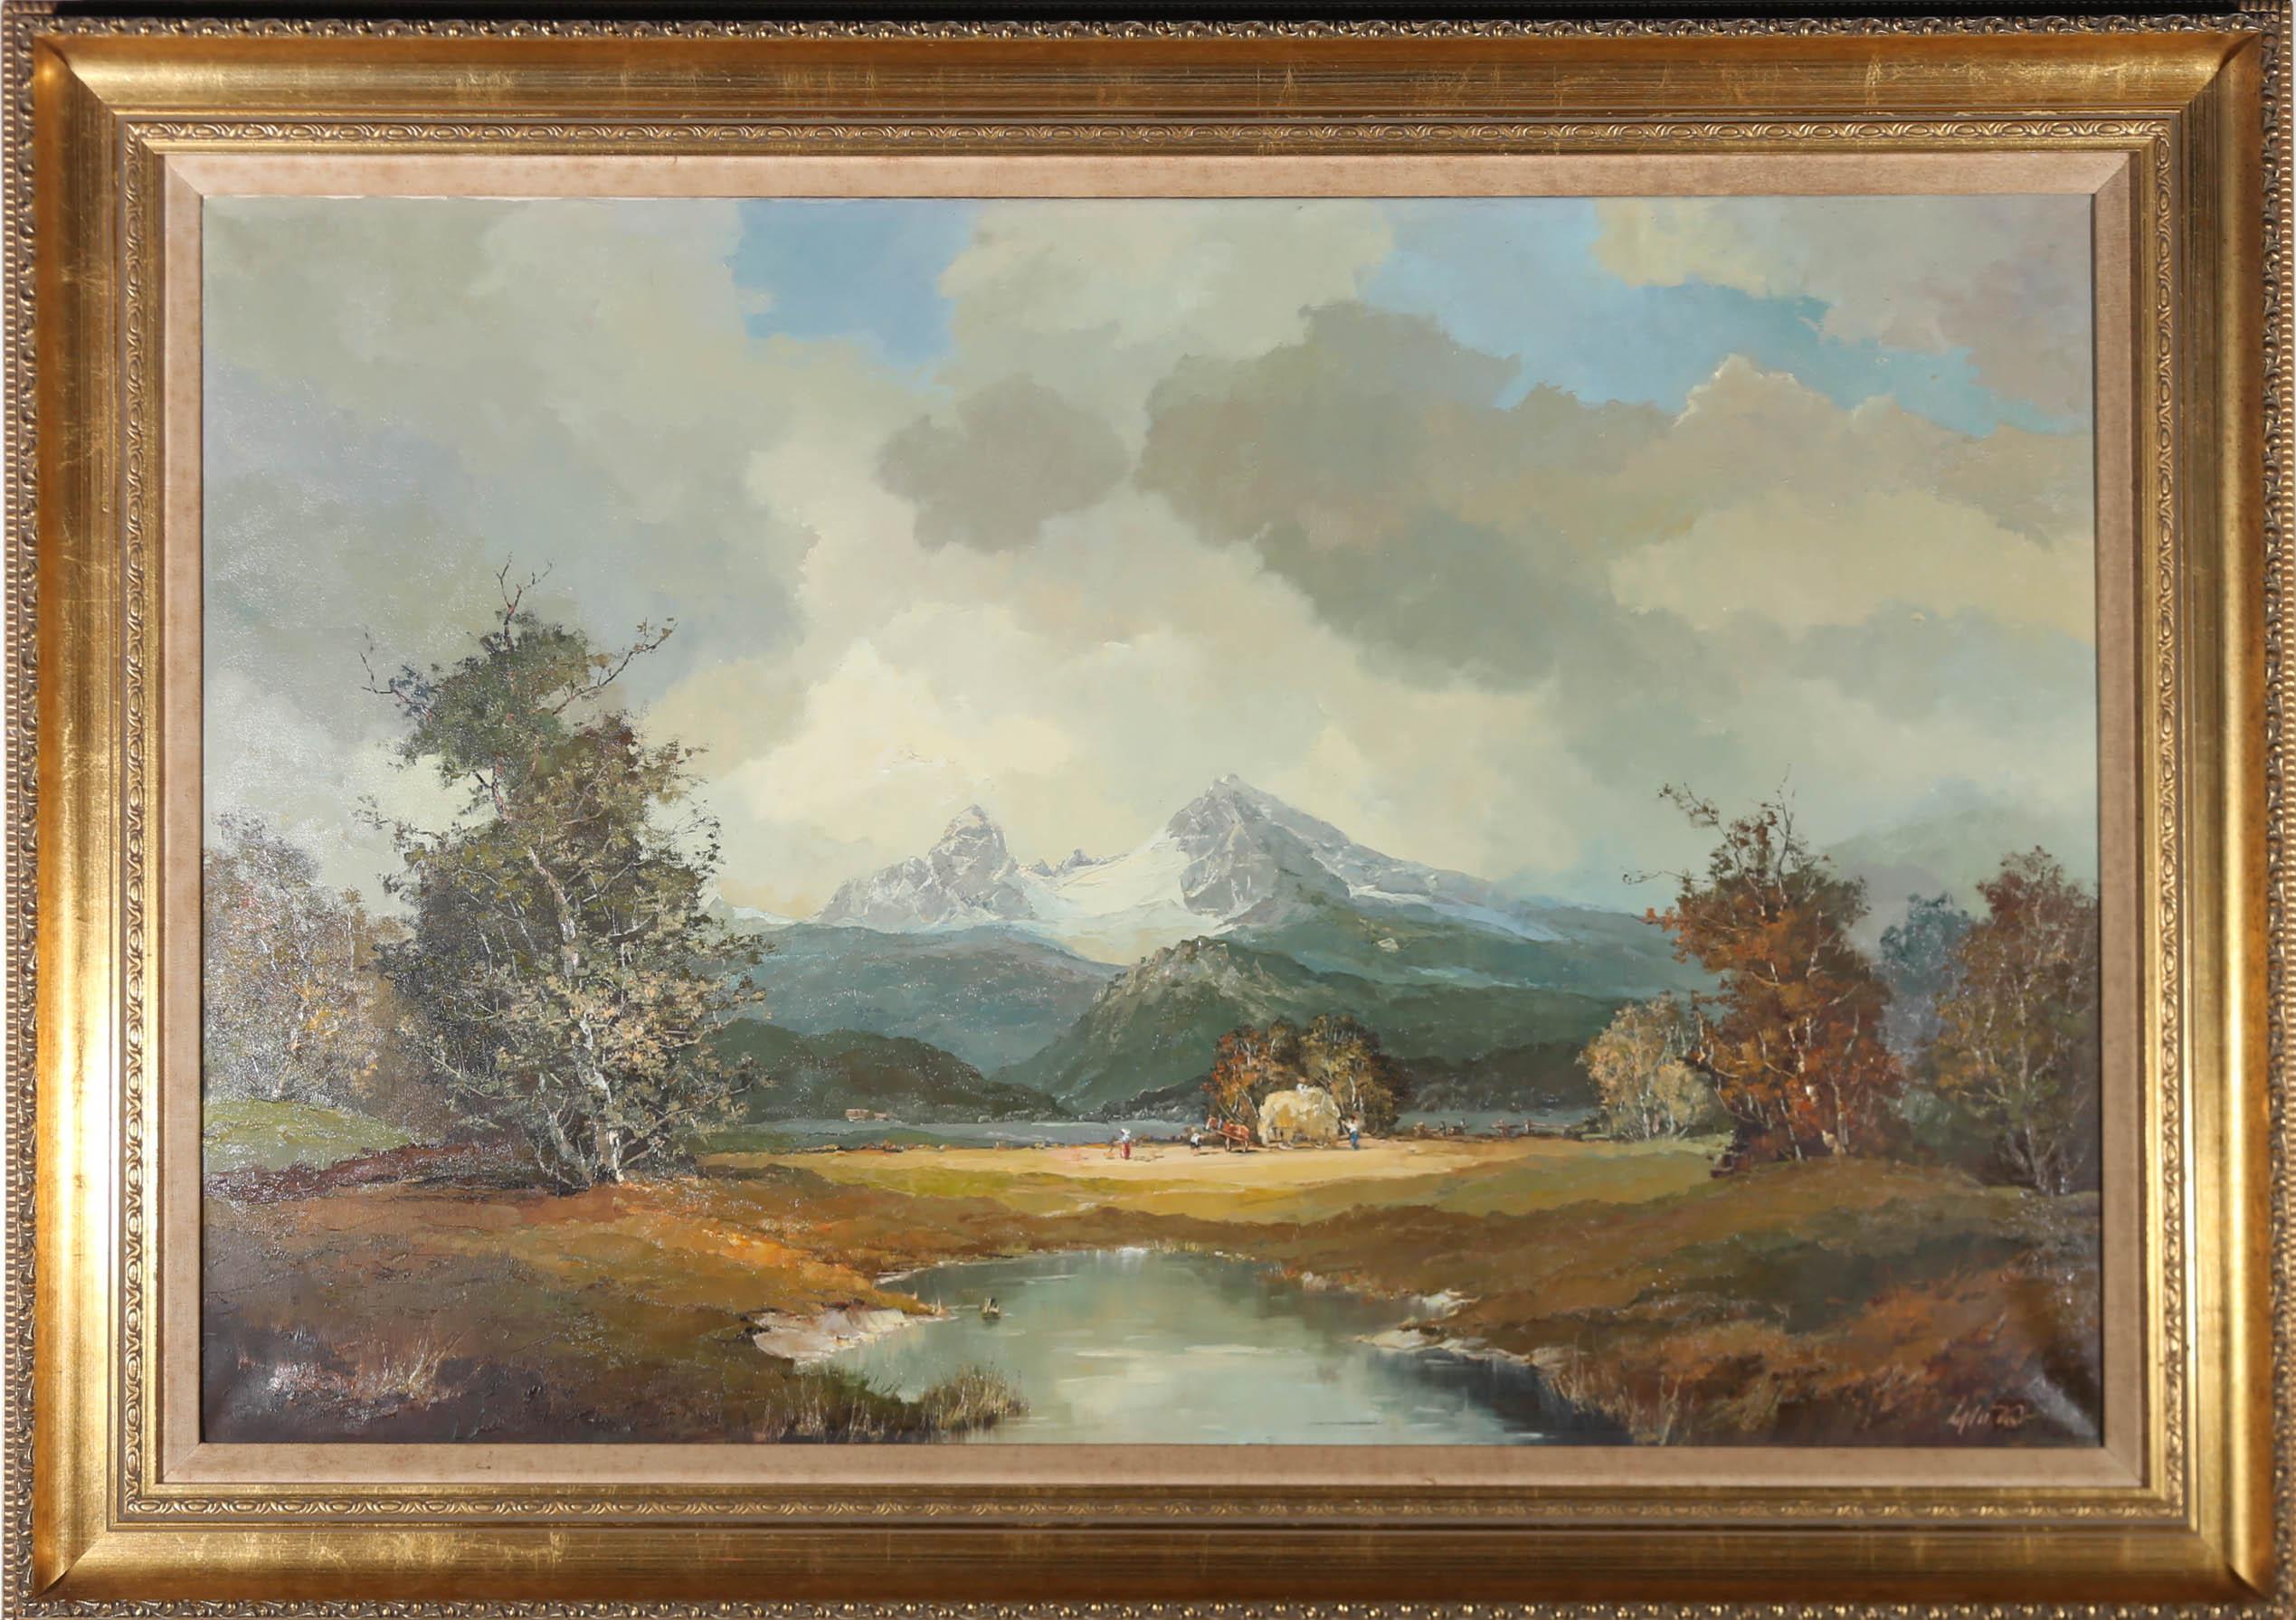 Unknown Landscape Painting - 20th Century Oil - Mountainside Hay Making